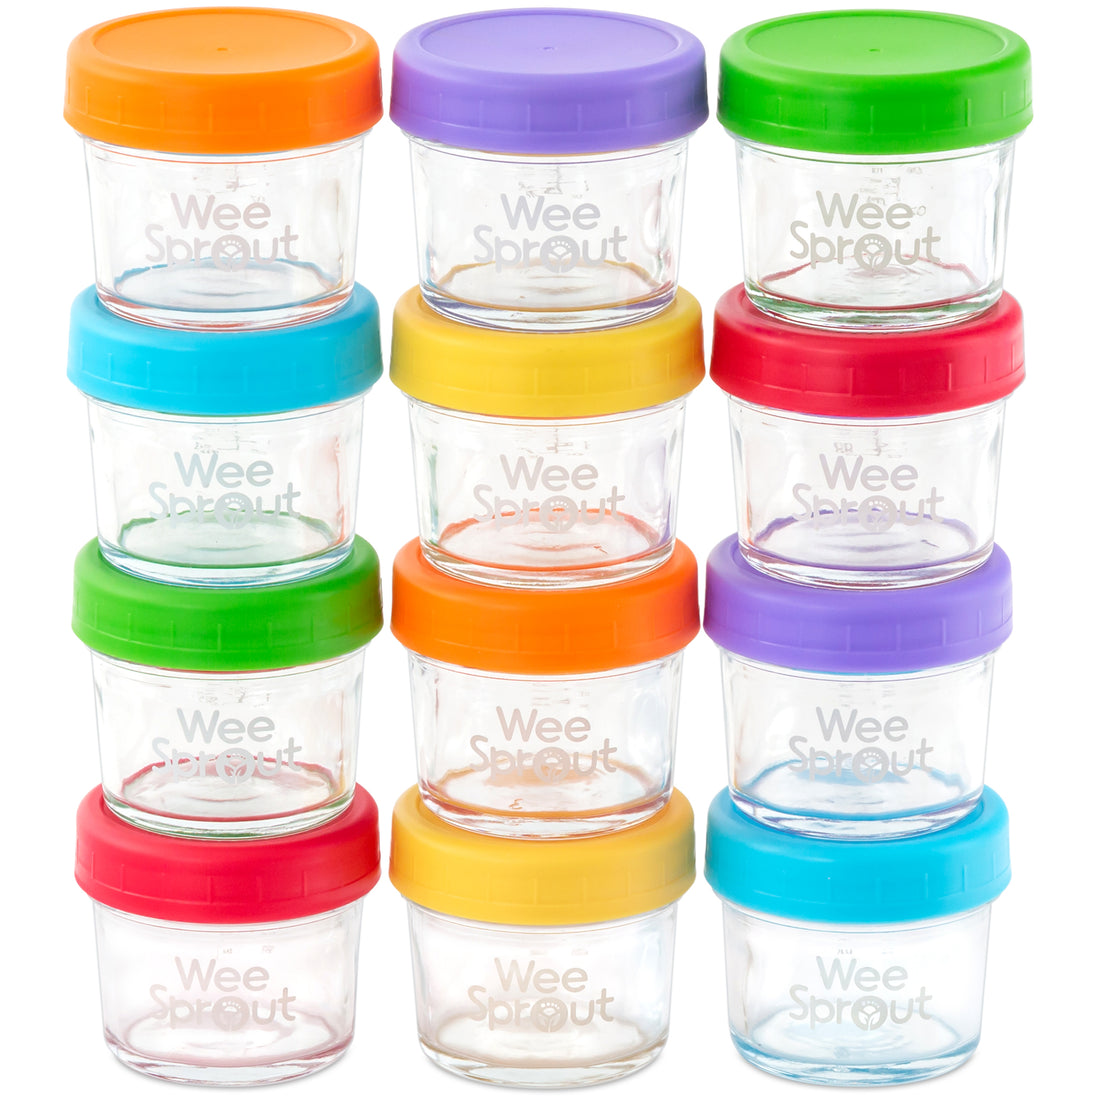 Elacra [4oz, 6-pack] Glass Baby Food Storage Containers Small Glass Containers with BPA-Free & Locking Lids - Freezer, Oven and Microwave Safe, Pink